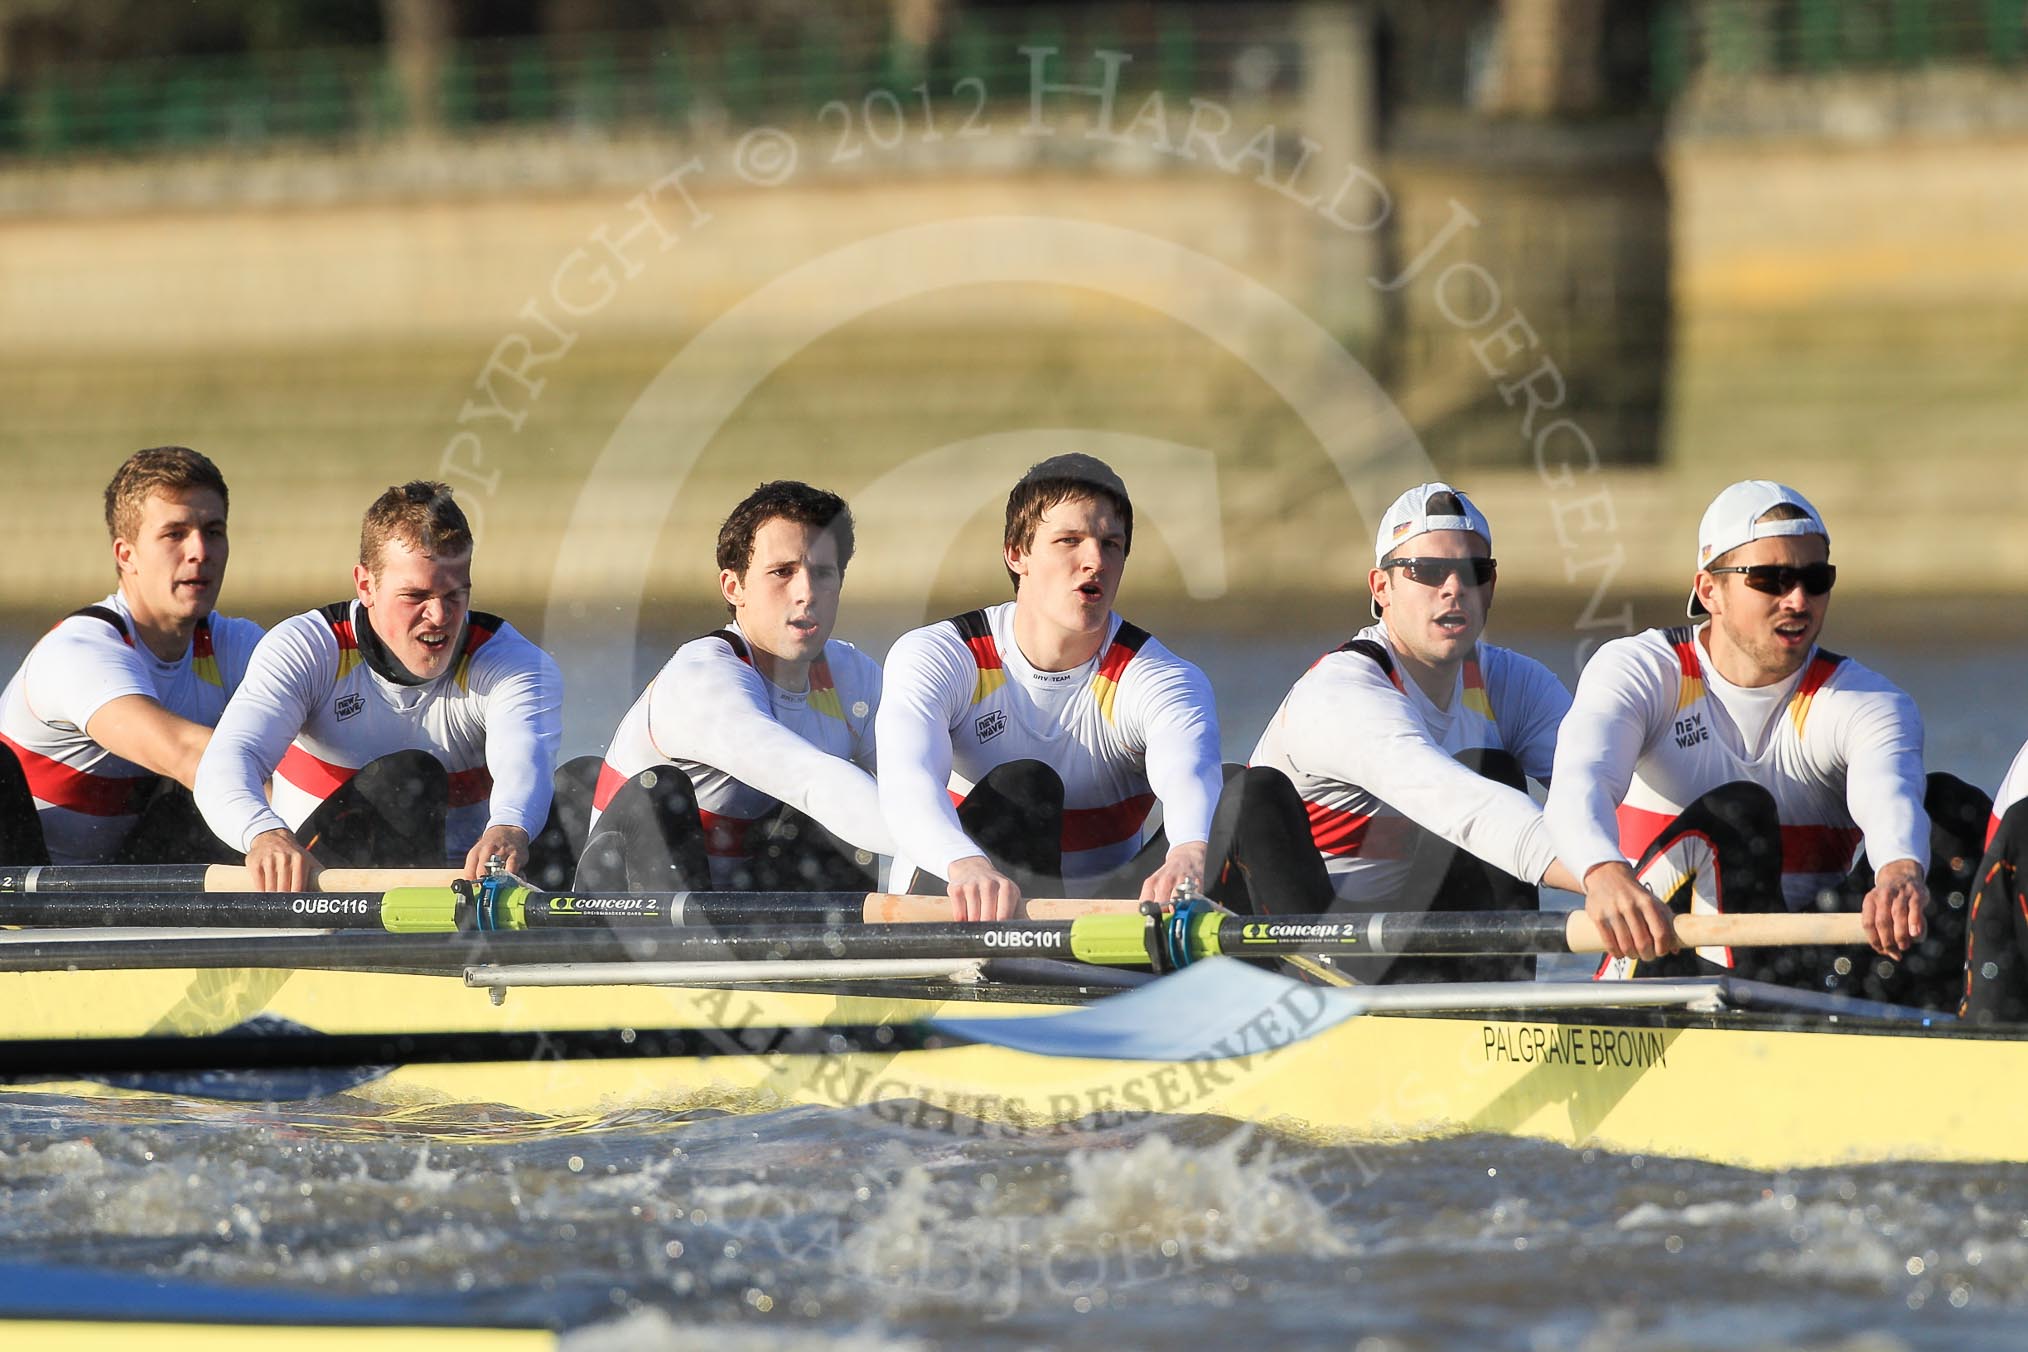 The Boat Race season 2012 - fixture OUBC vs German U23: The German U23 boat, from right to left Felix Wimberger, Maximilian Planer, Malte Jakschik, Alexander Thierfelder, Robin Ponte, and Rene Stüven..
River Thames between Putney and Mortlake,
London,

United Kingdom,
on 26 February 2012 at 15:26, image #49